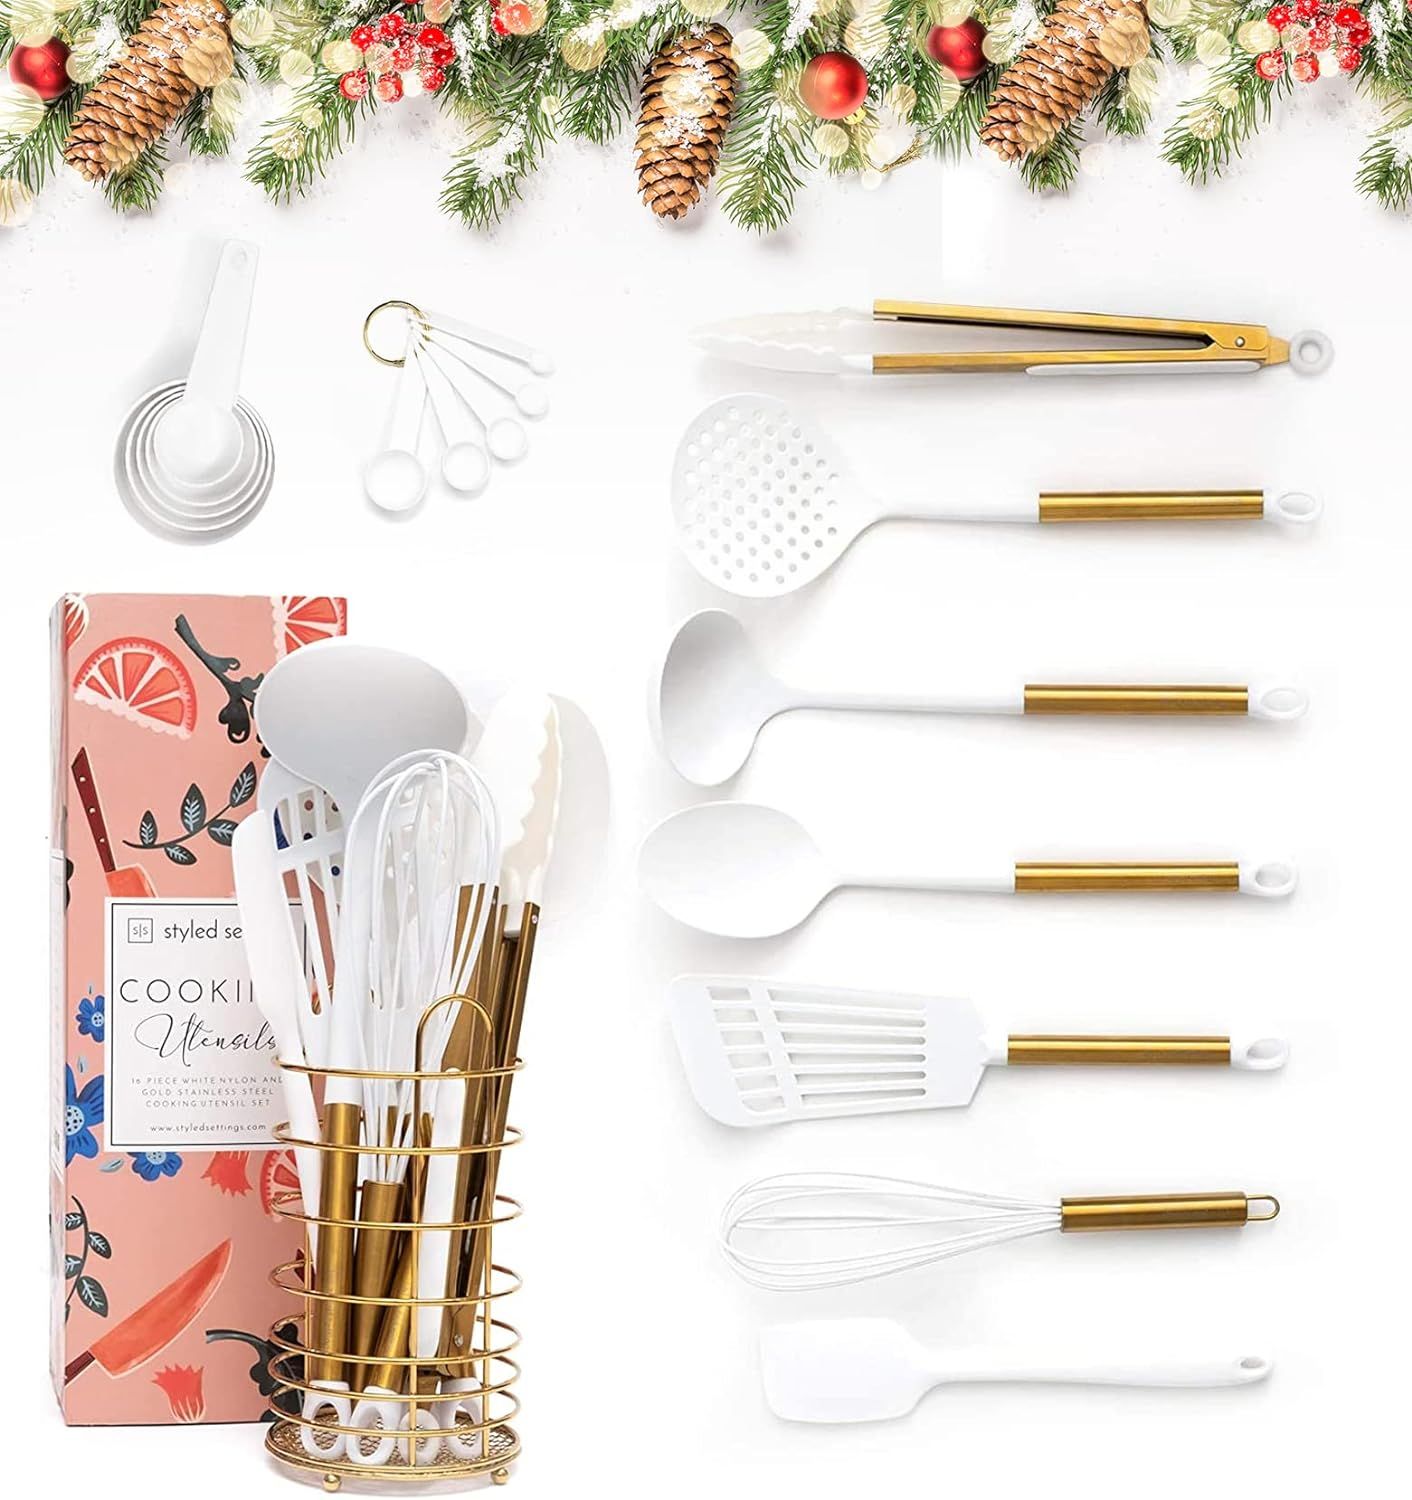 White and Gold Cooking Utensils with Holder - 18 PC Gold Kitchen Utensils Set Includes White Cook... | Amazon (US)